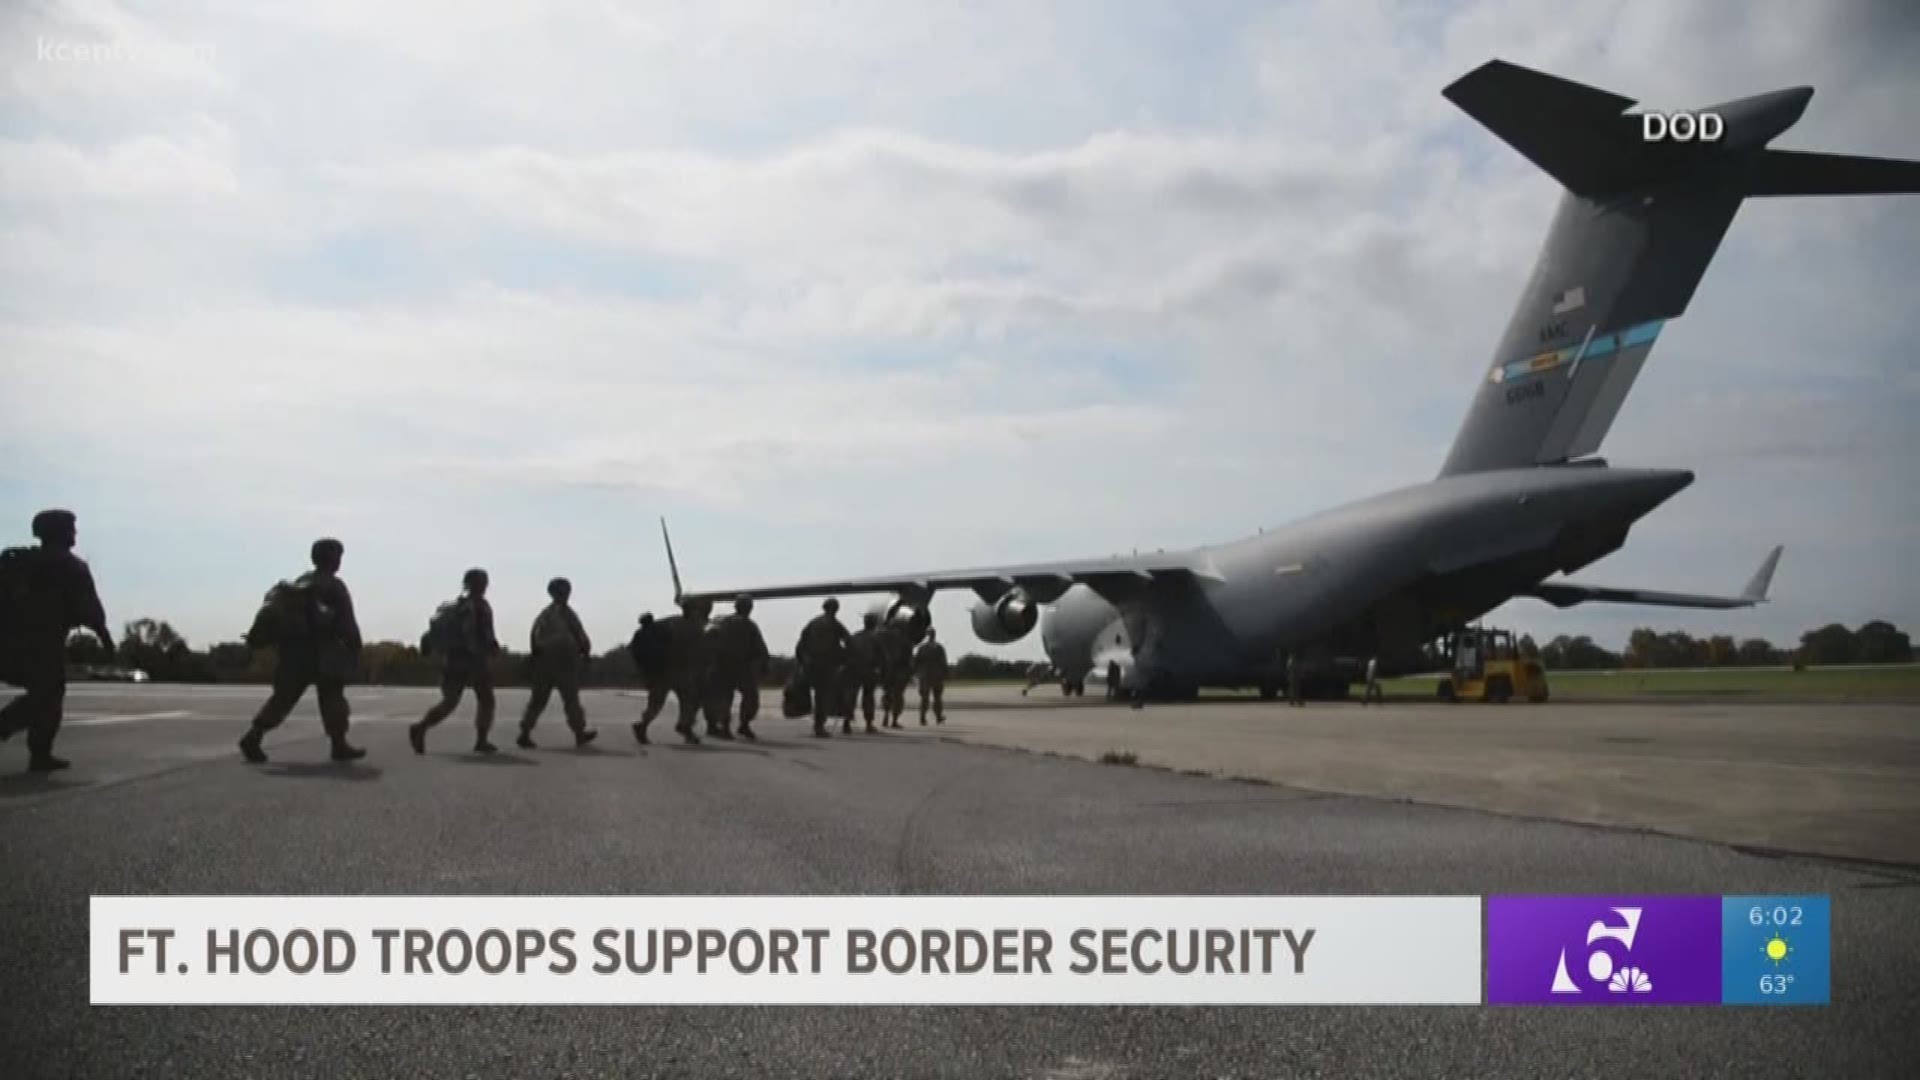 Troops from bases across the country will be supporting the Department of Homeland Security.